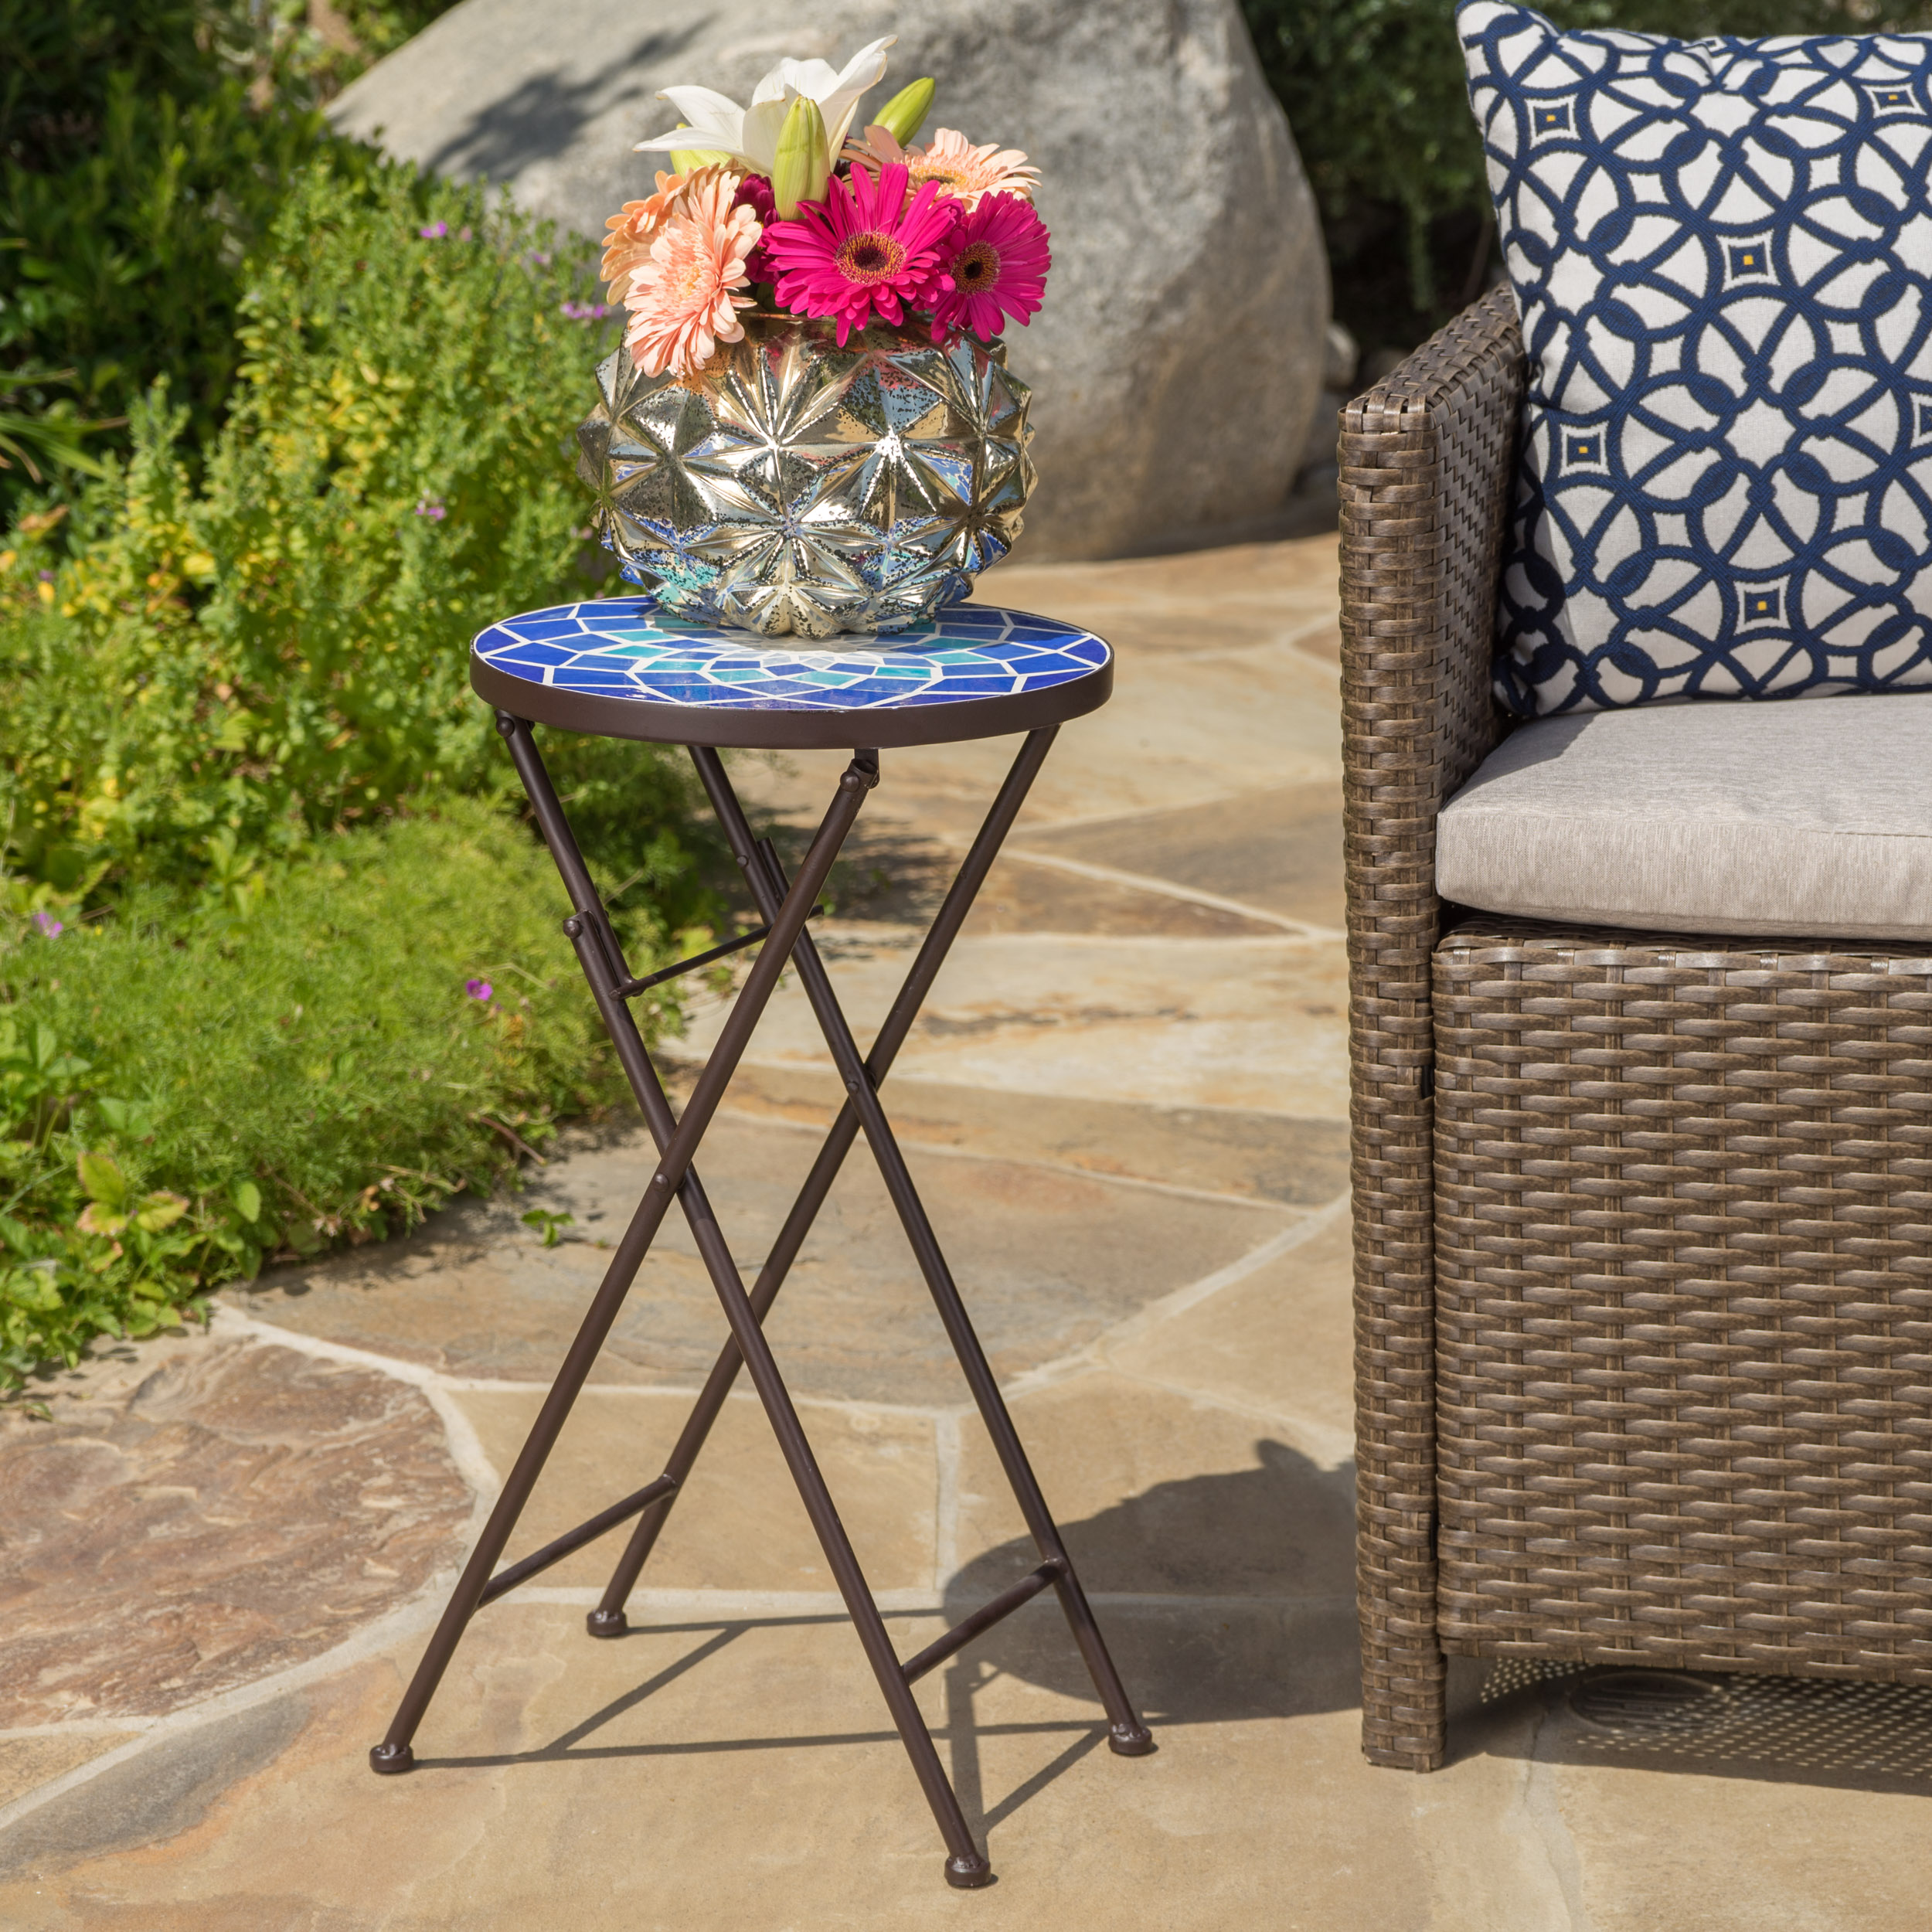 Moore Outdoor Glass Side Table with Iron Frame, Blue and White - image 1 of 2